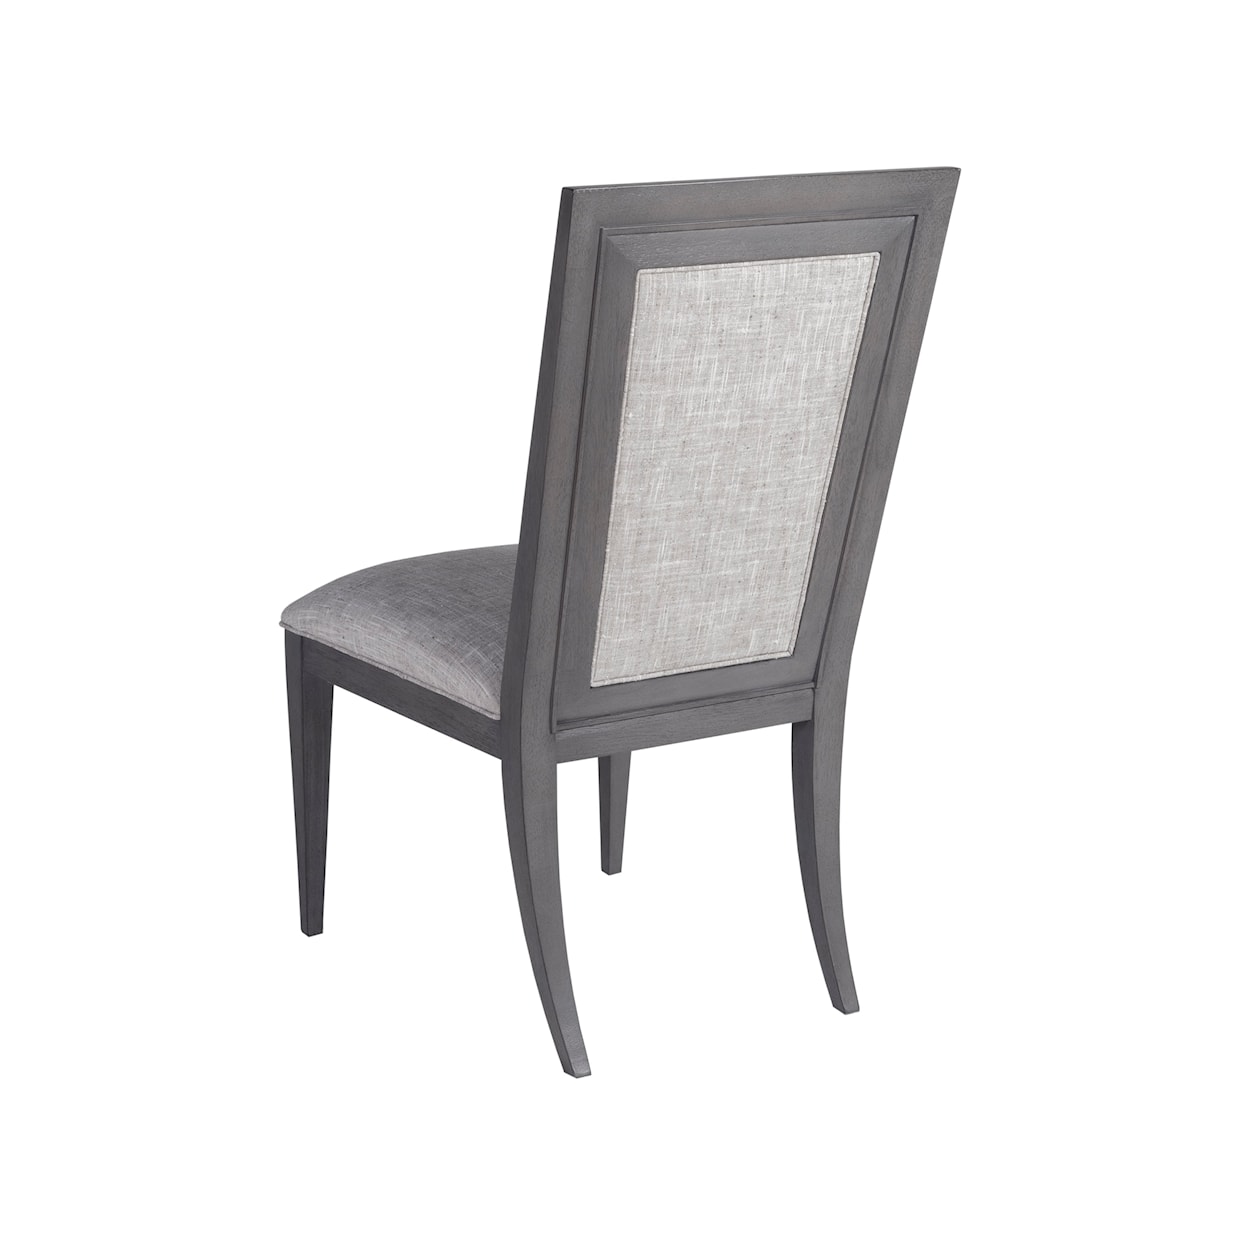 Artistica Appellation Upholstered Side Chair